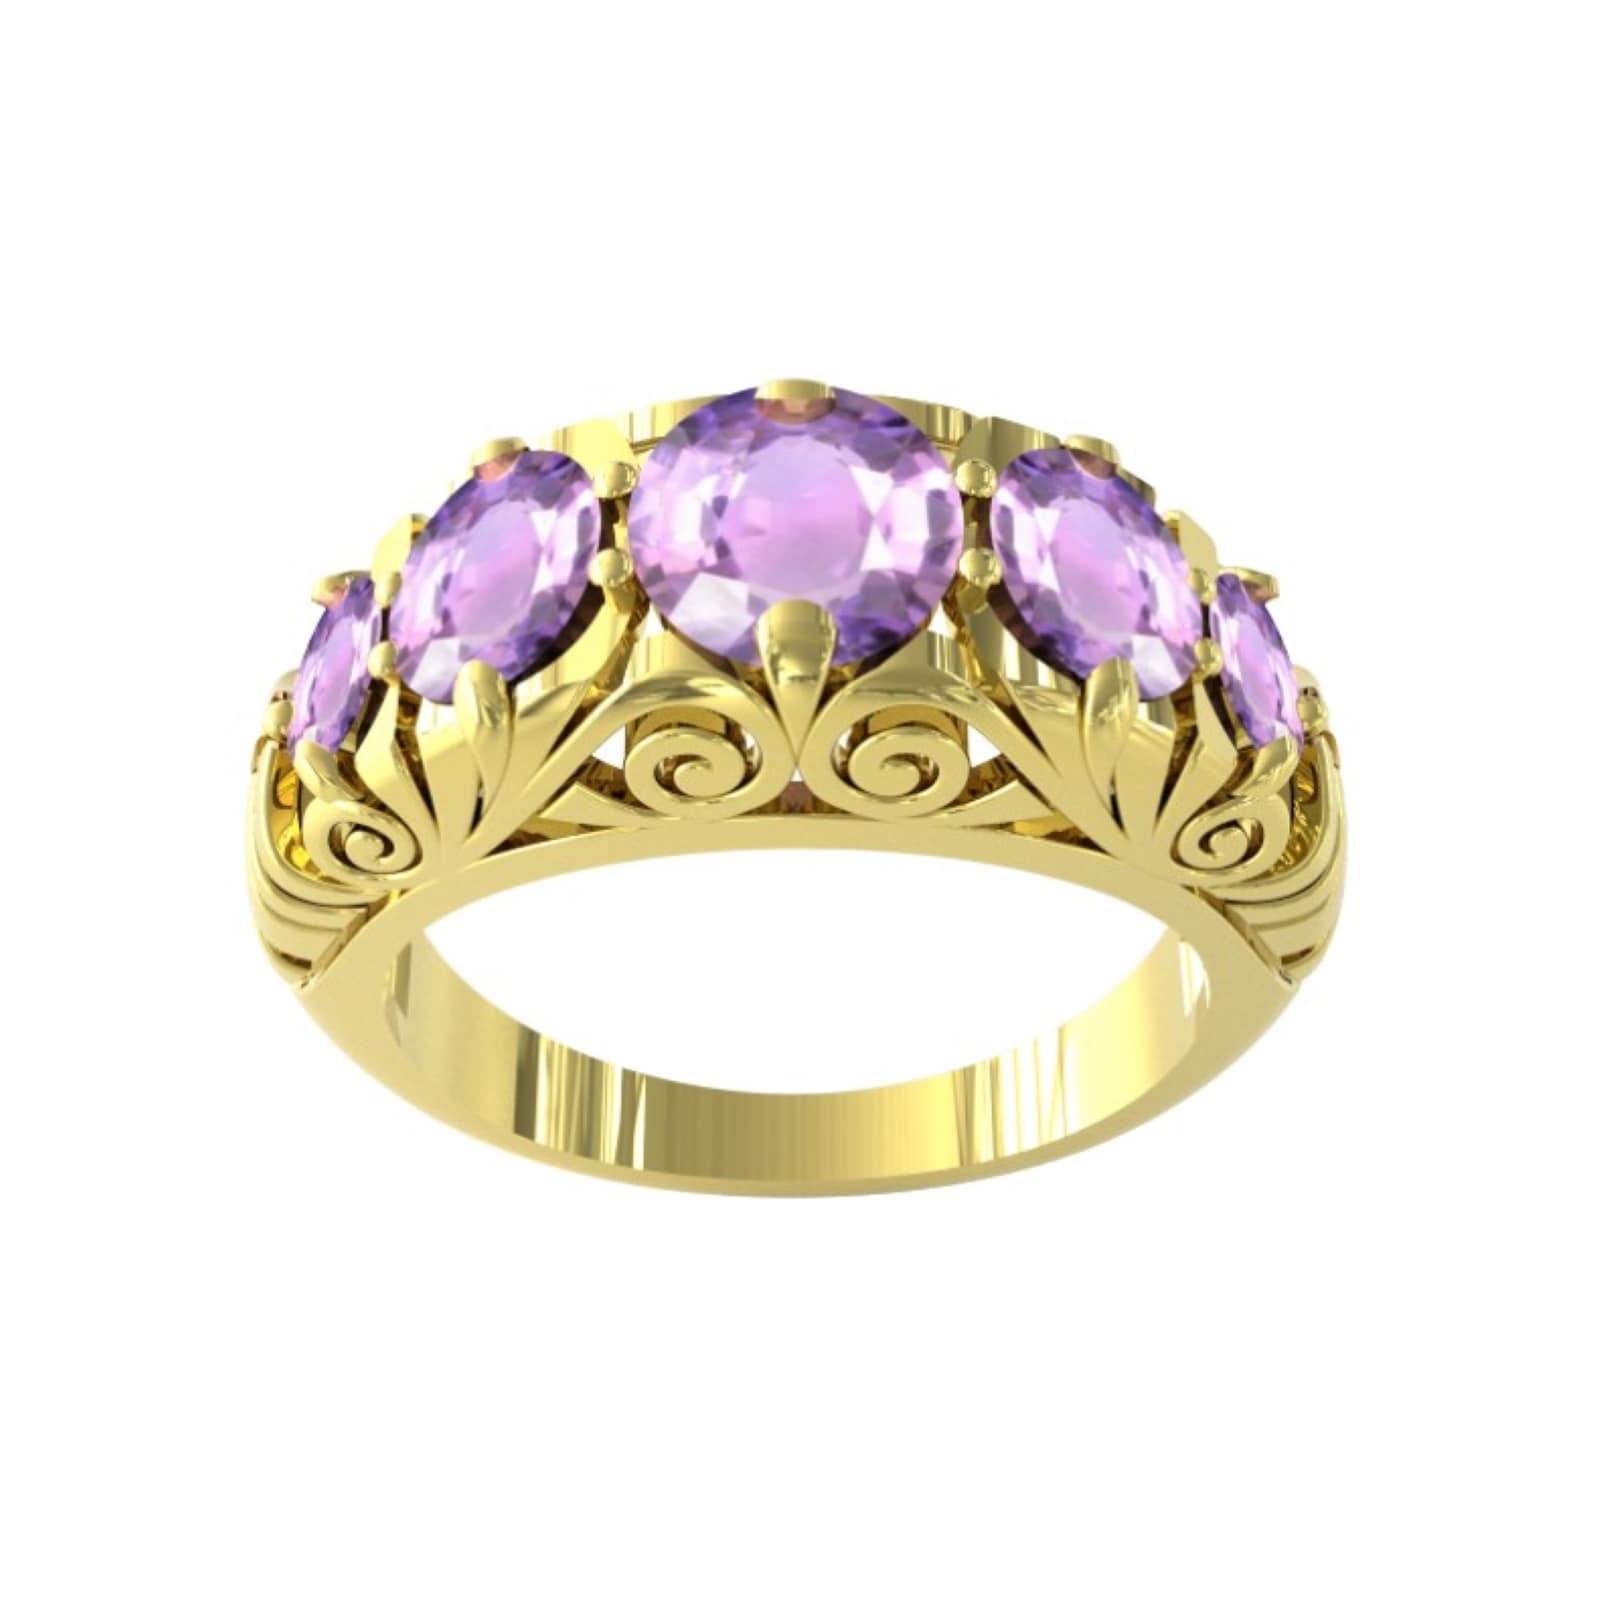 9ct Yellow Gold Victorian Style 5 Stone Amethyst Rings - Ring Size Z